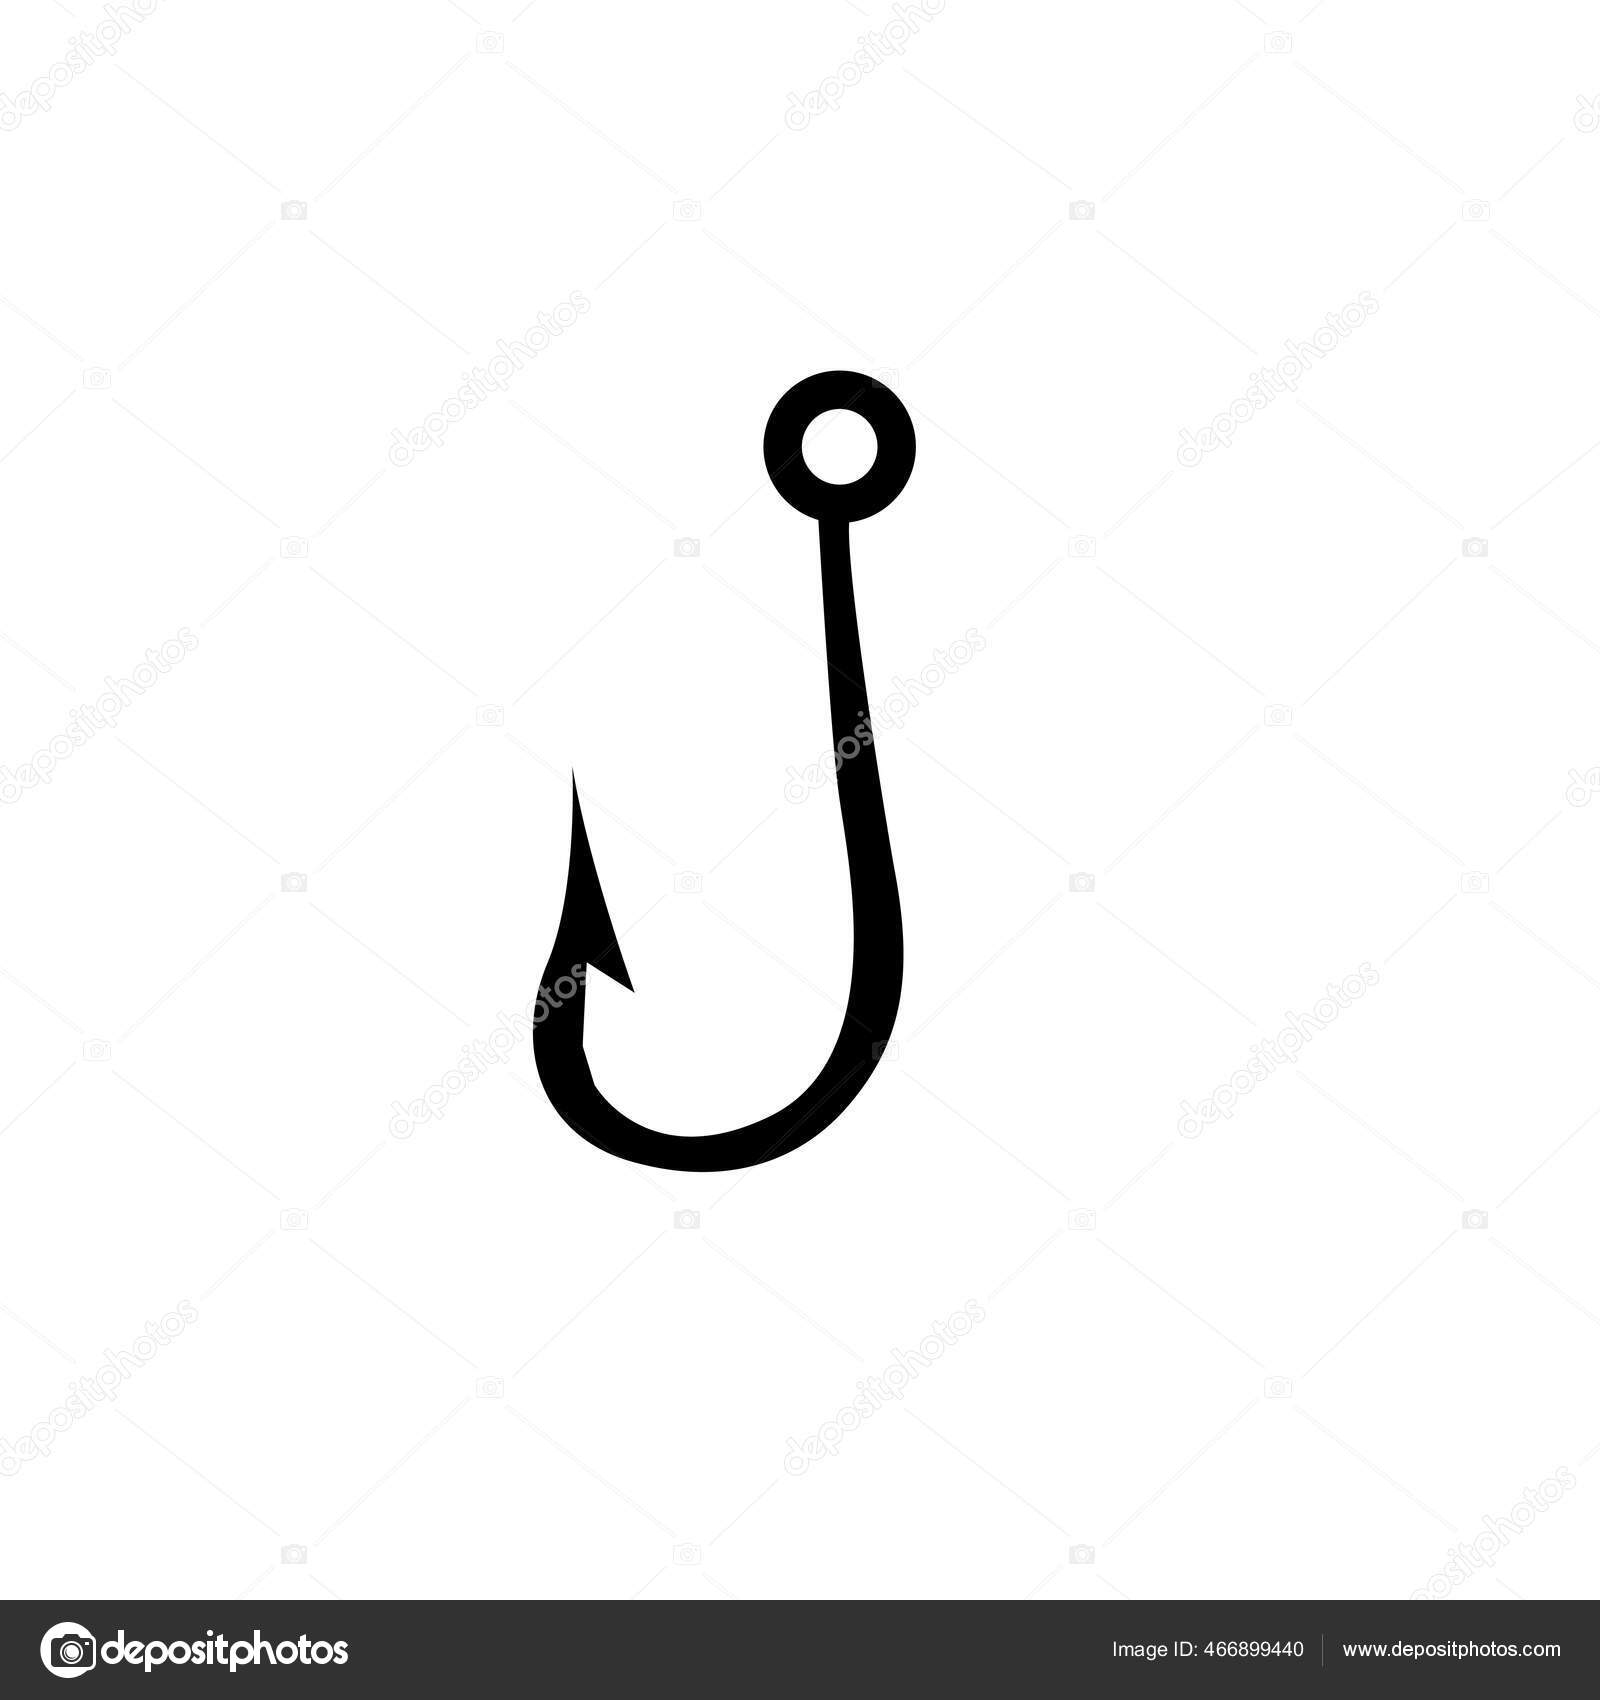 Illustration Vector Graphic Fishing Hook Icon Design Template Stock Vector  by ©Sumberejeki 466899440